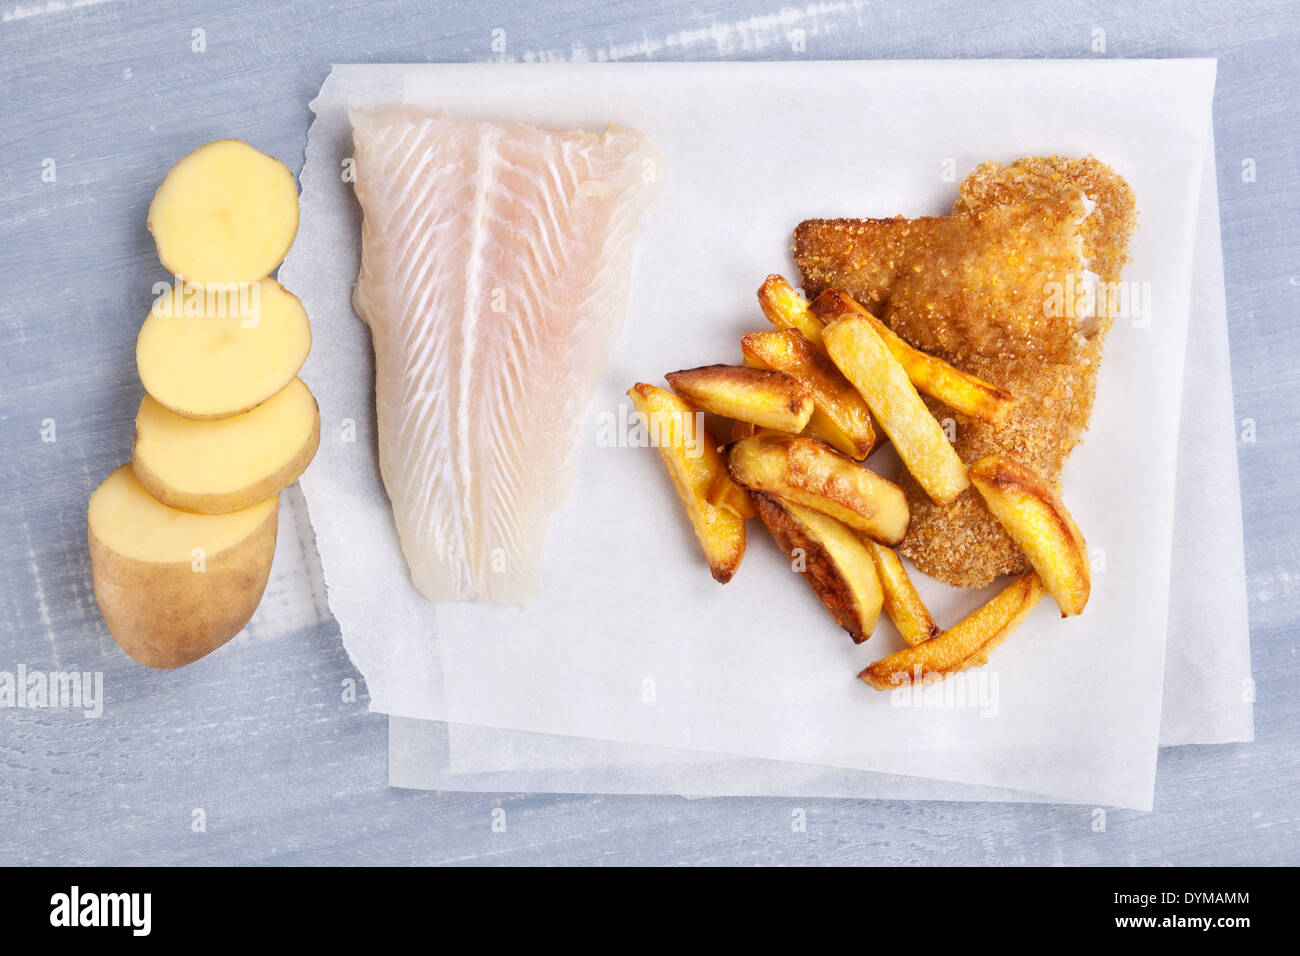 Traditional seafood eating. Raw uncooked fish fillet, fish and chips on wooden background, top view. Delicious healthy fish eat Stock Photo